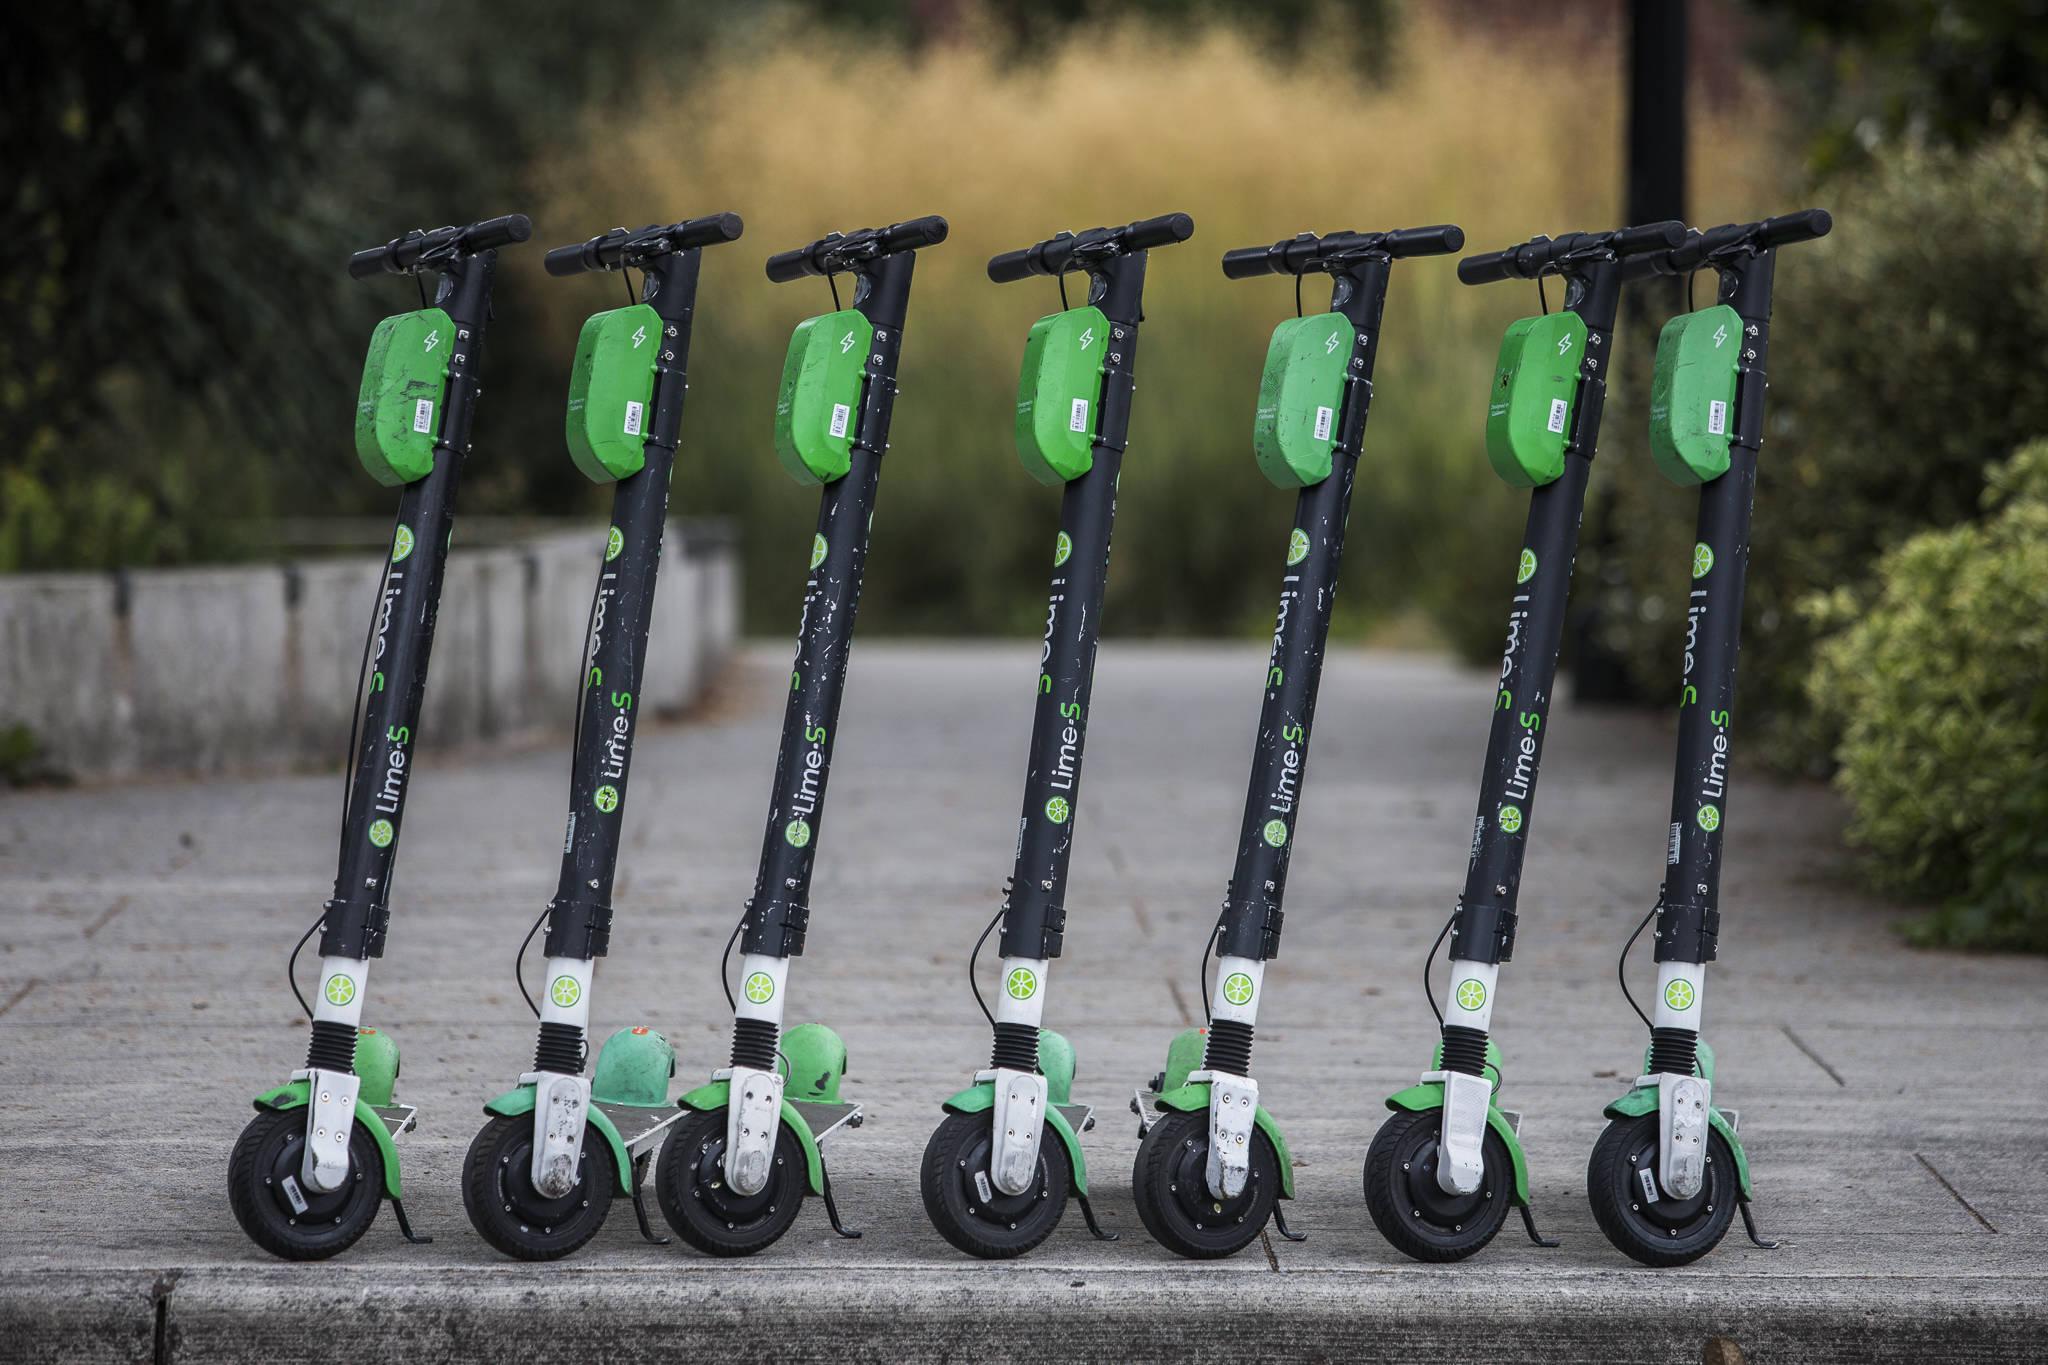 Fully charged Lime scooters along Bothell Way are ready to roll Wednesday in Bothell. (Olivia Vanni / The Herald)